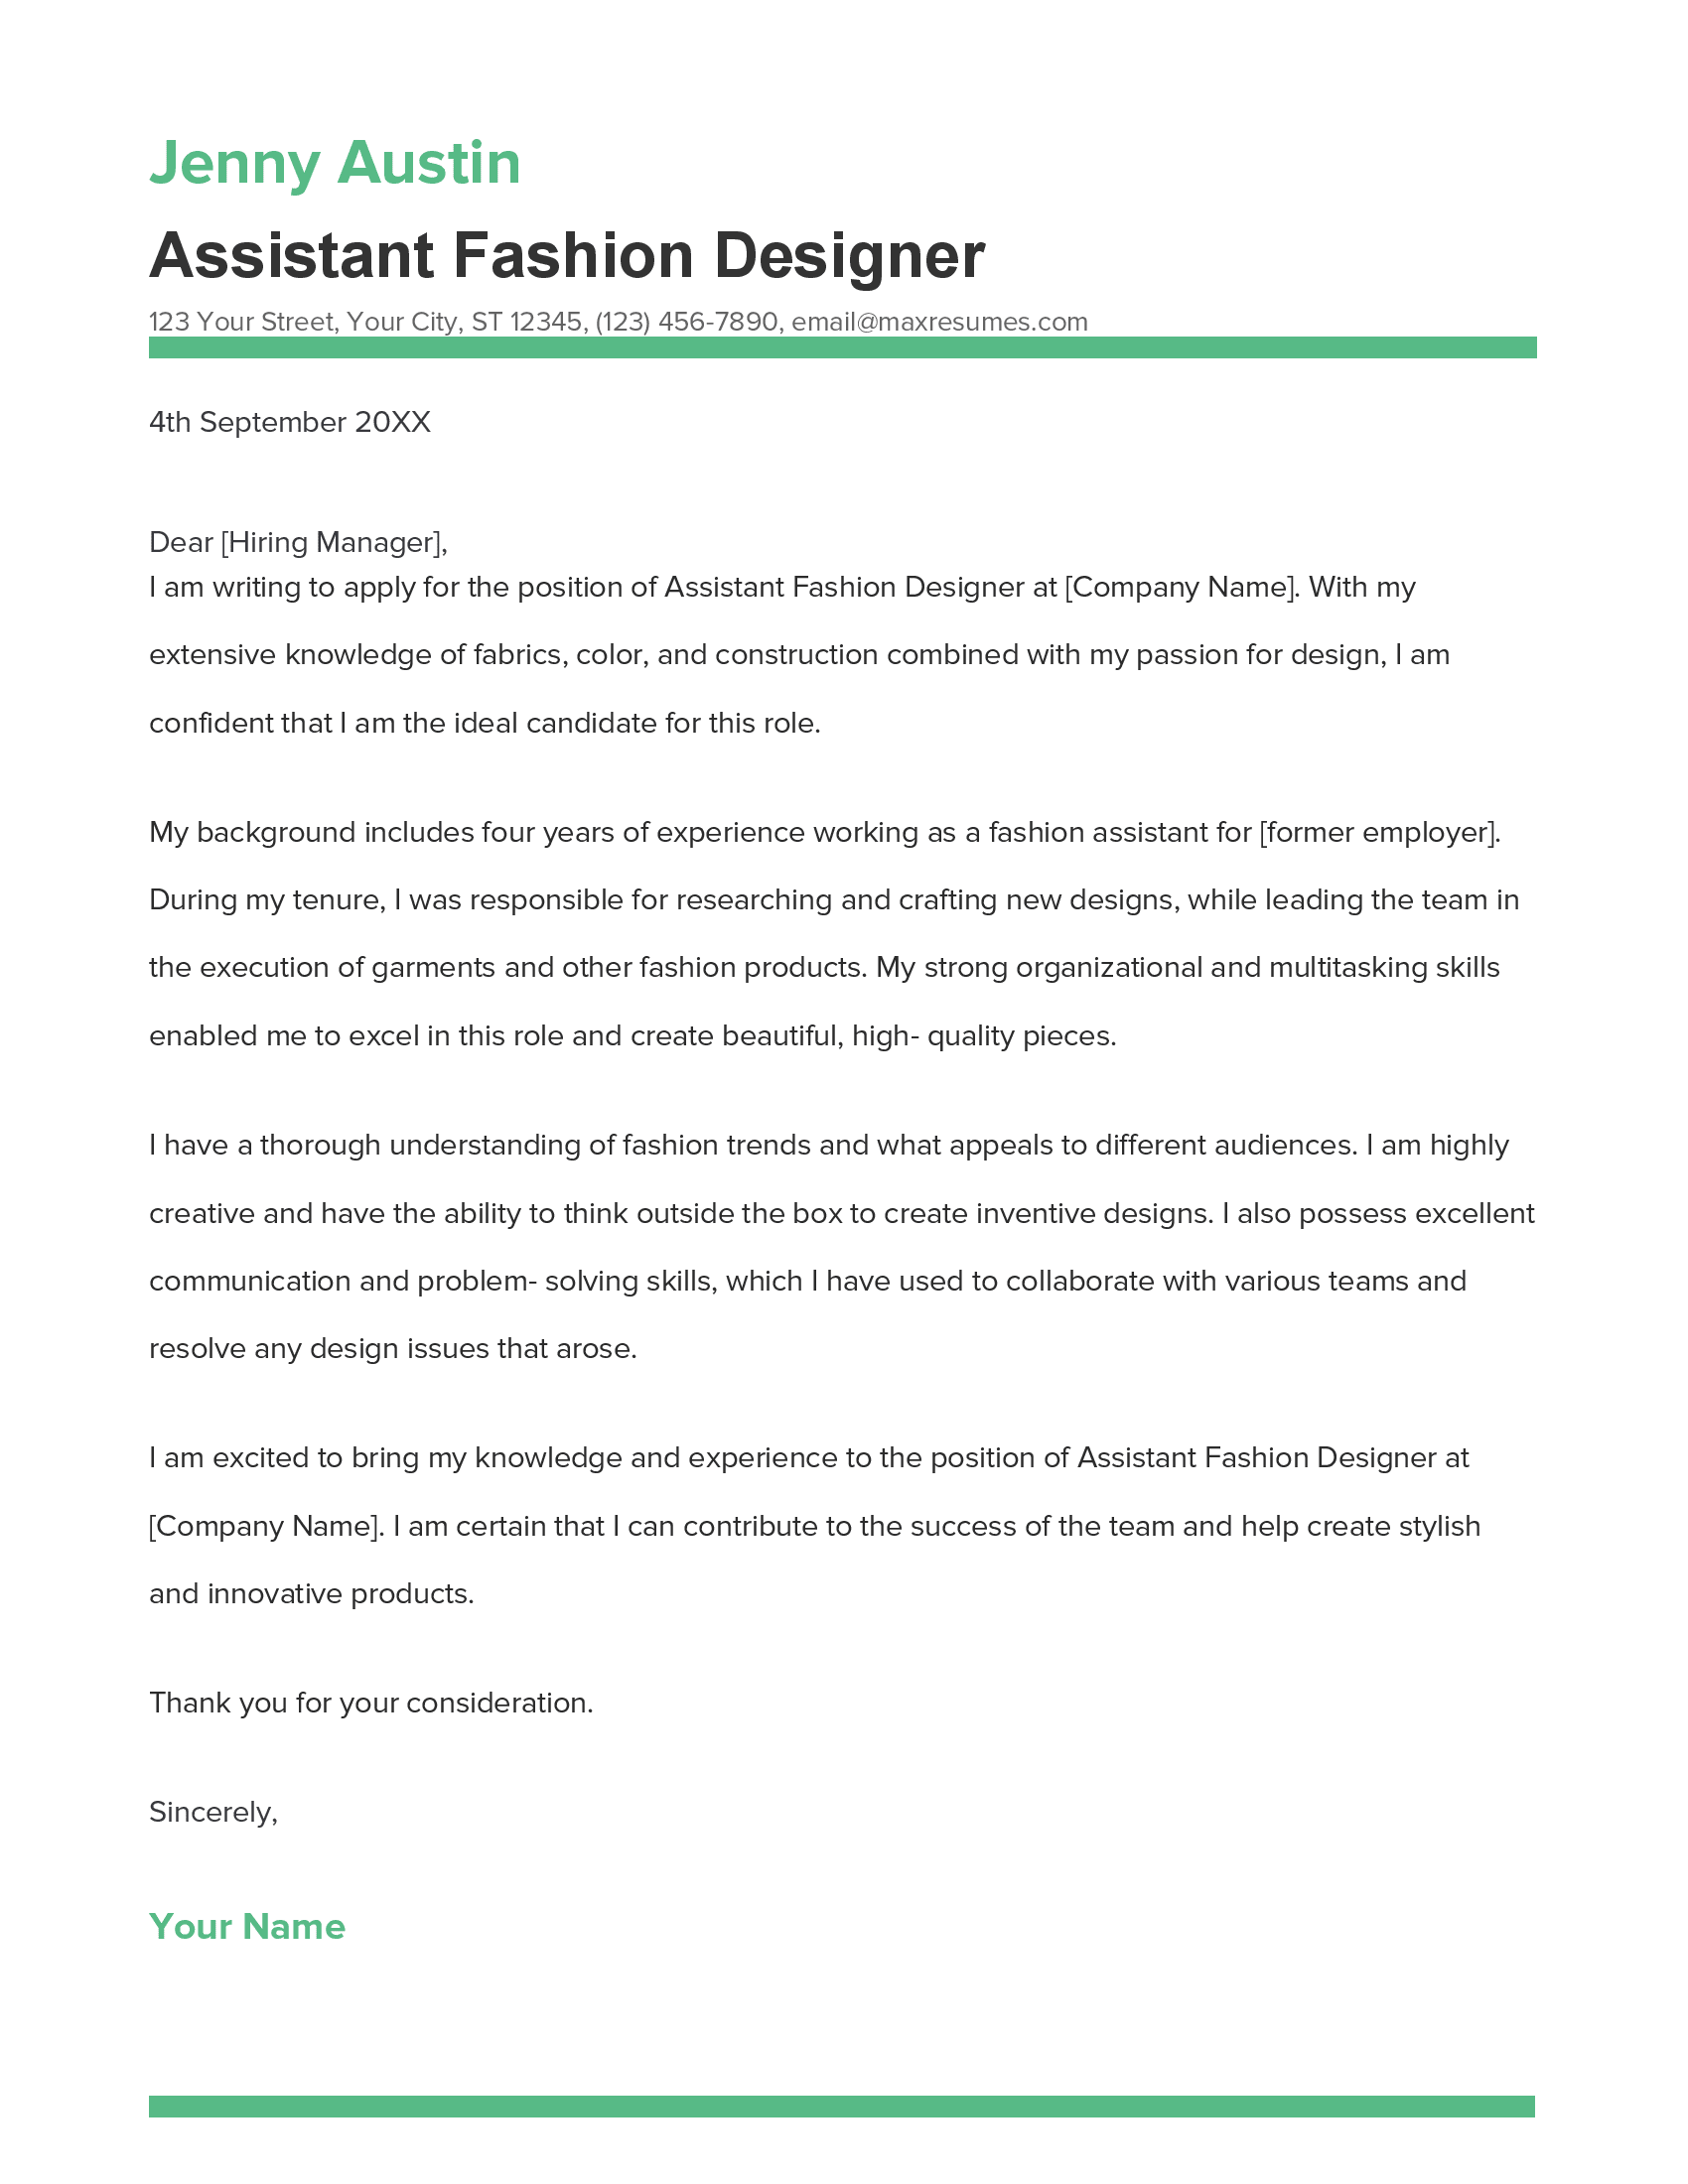 Assistant Fashion Designer Cover Letter Example